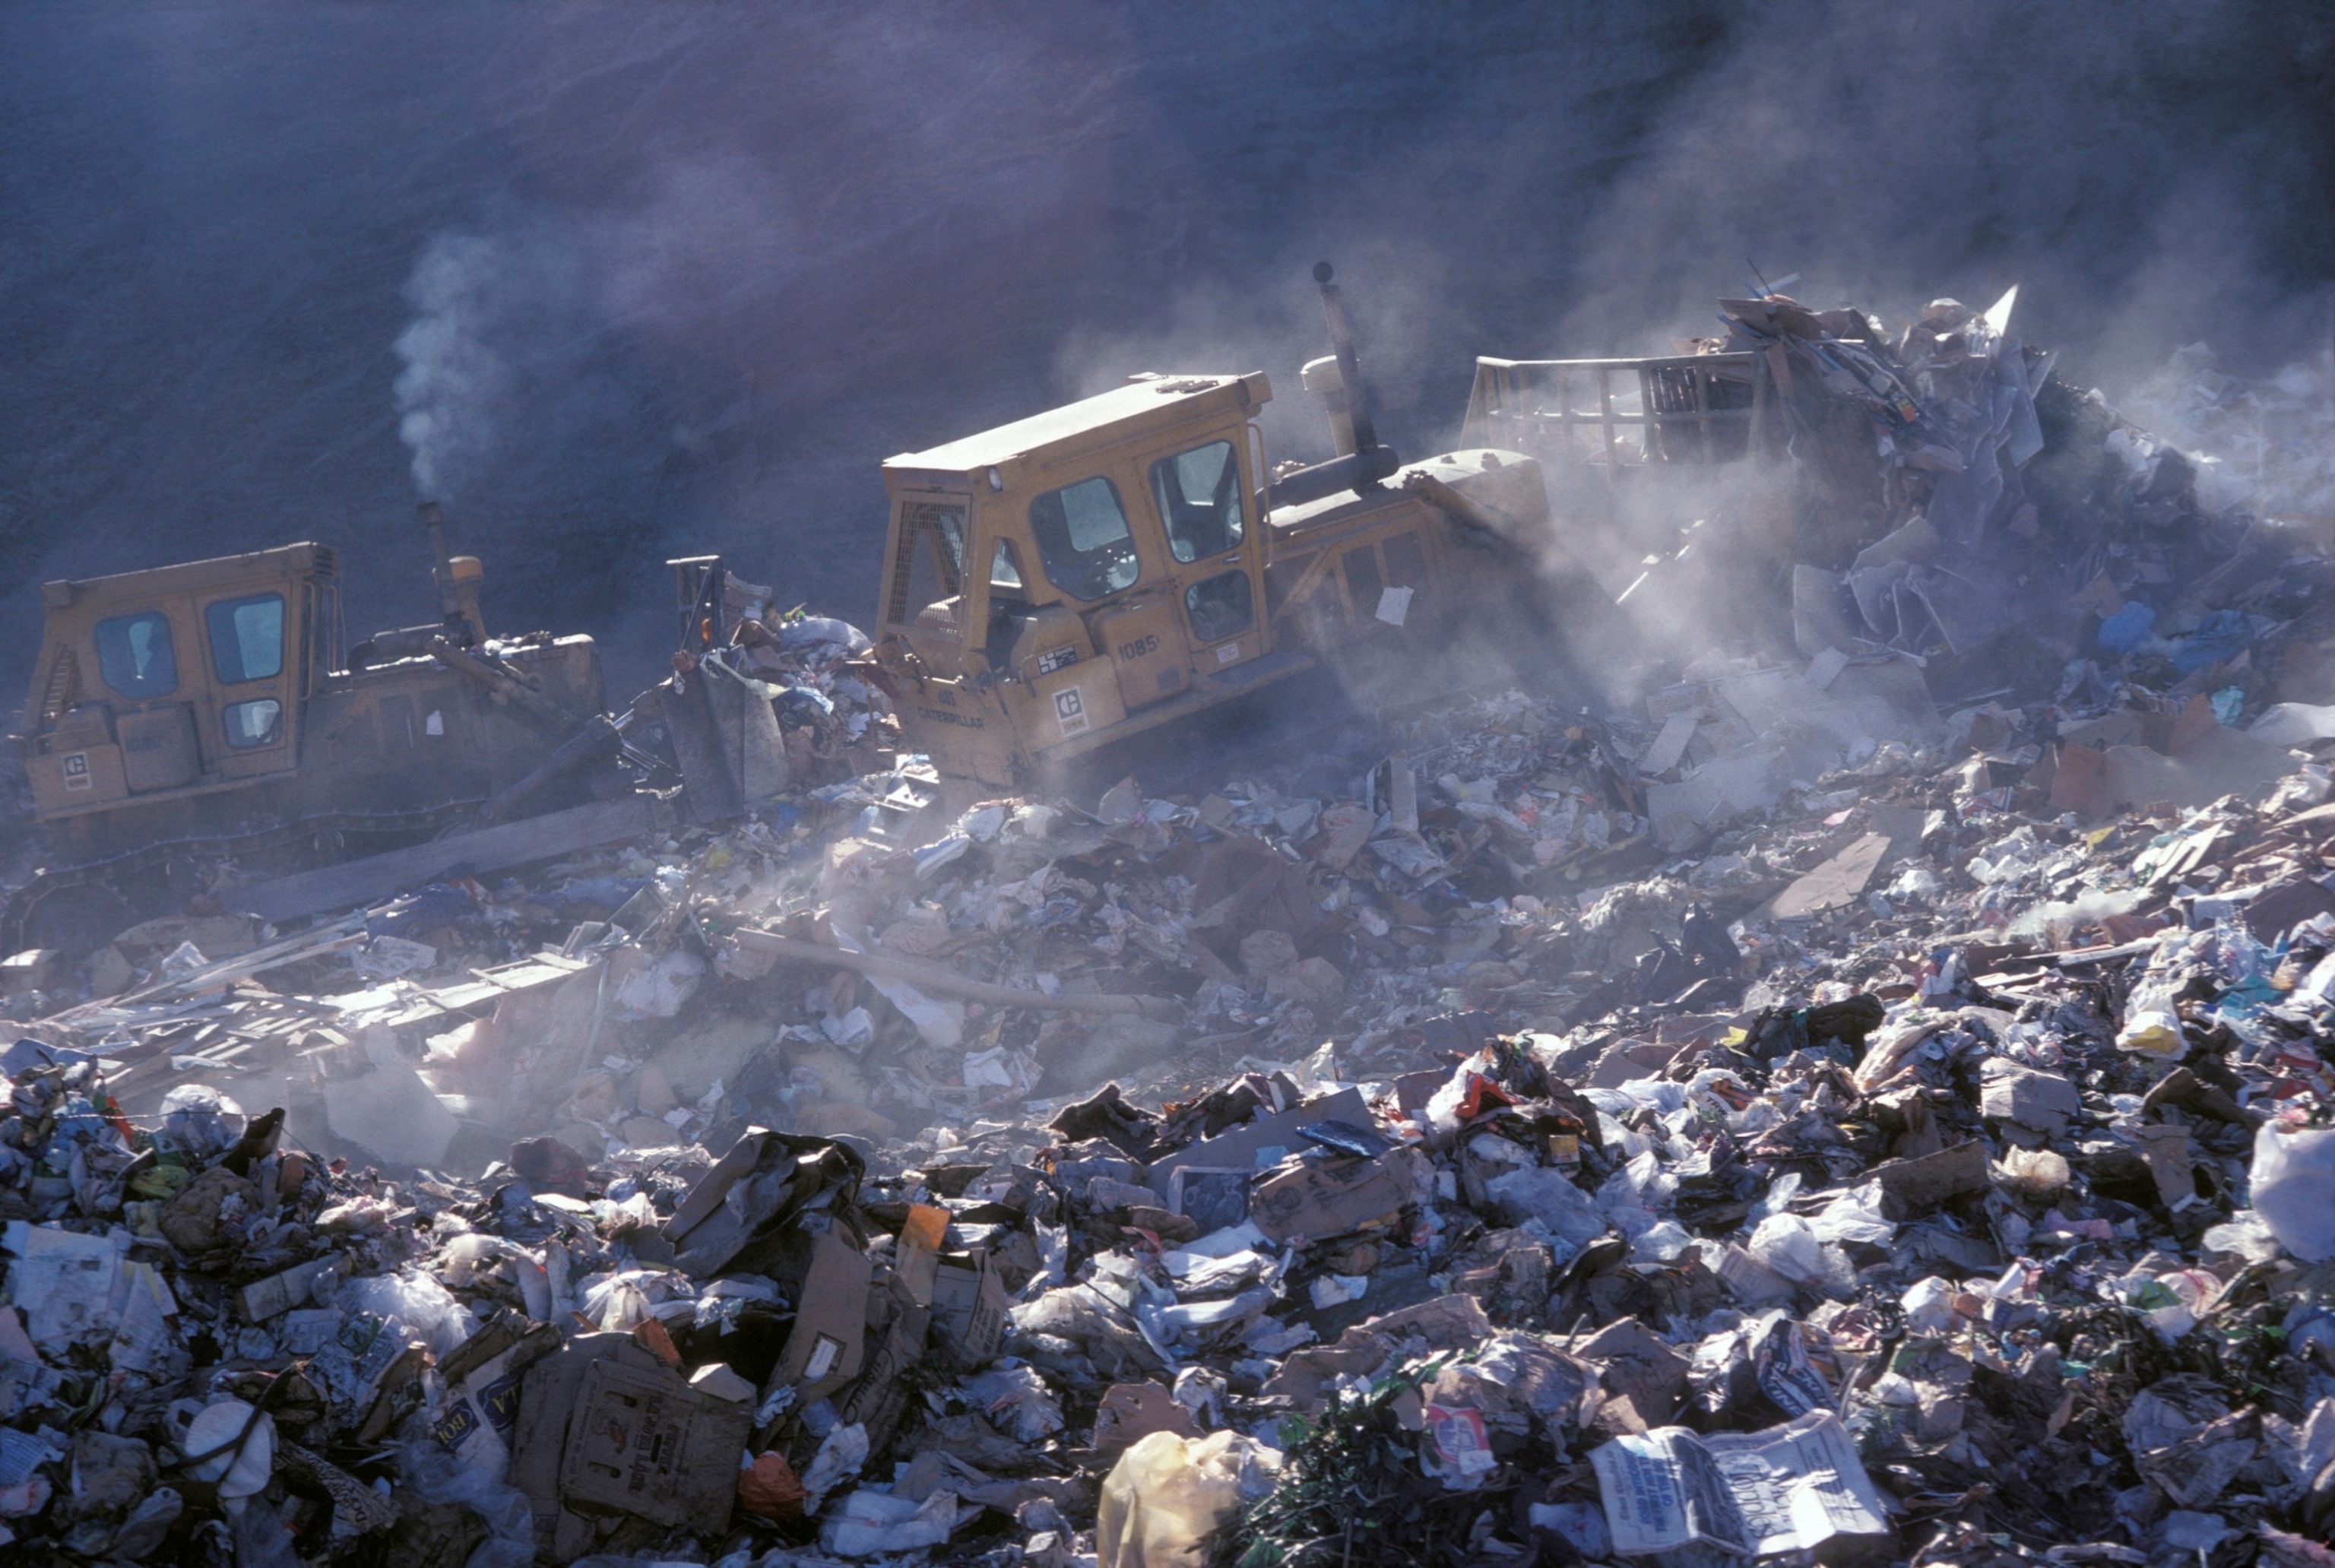 PHOTO: This undated photo shows bulldozers at a landfill in Los Angeles, CA.